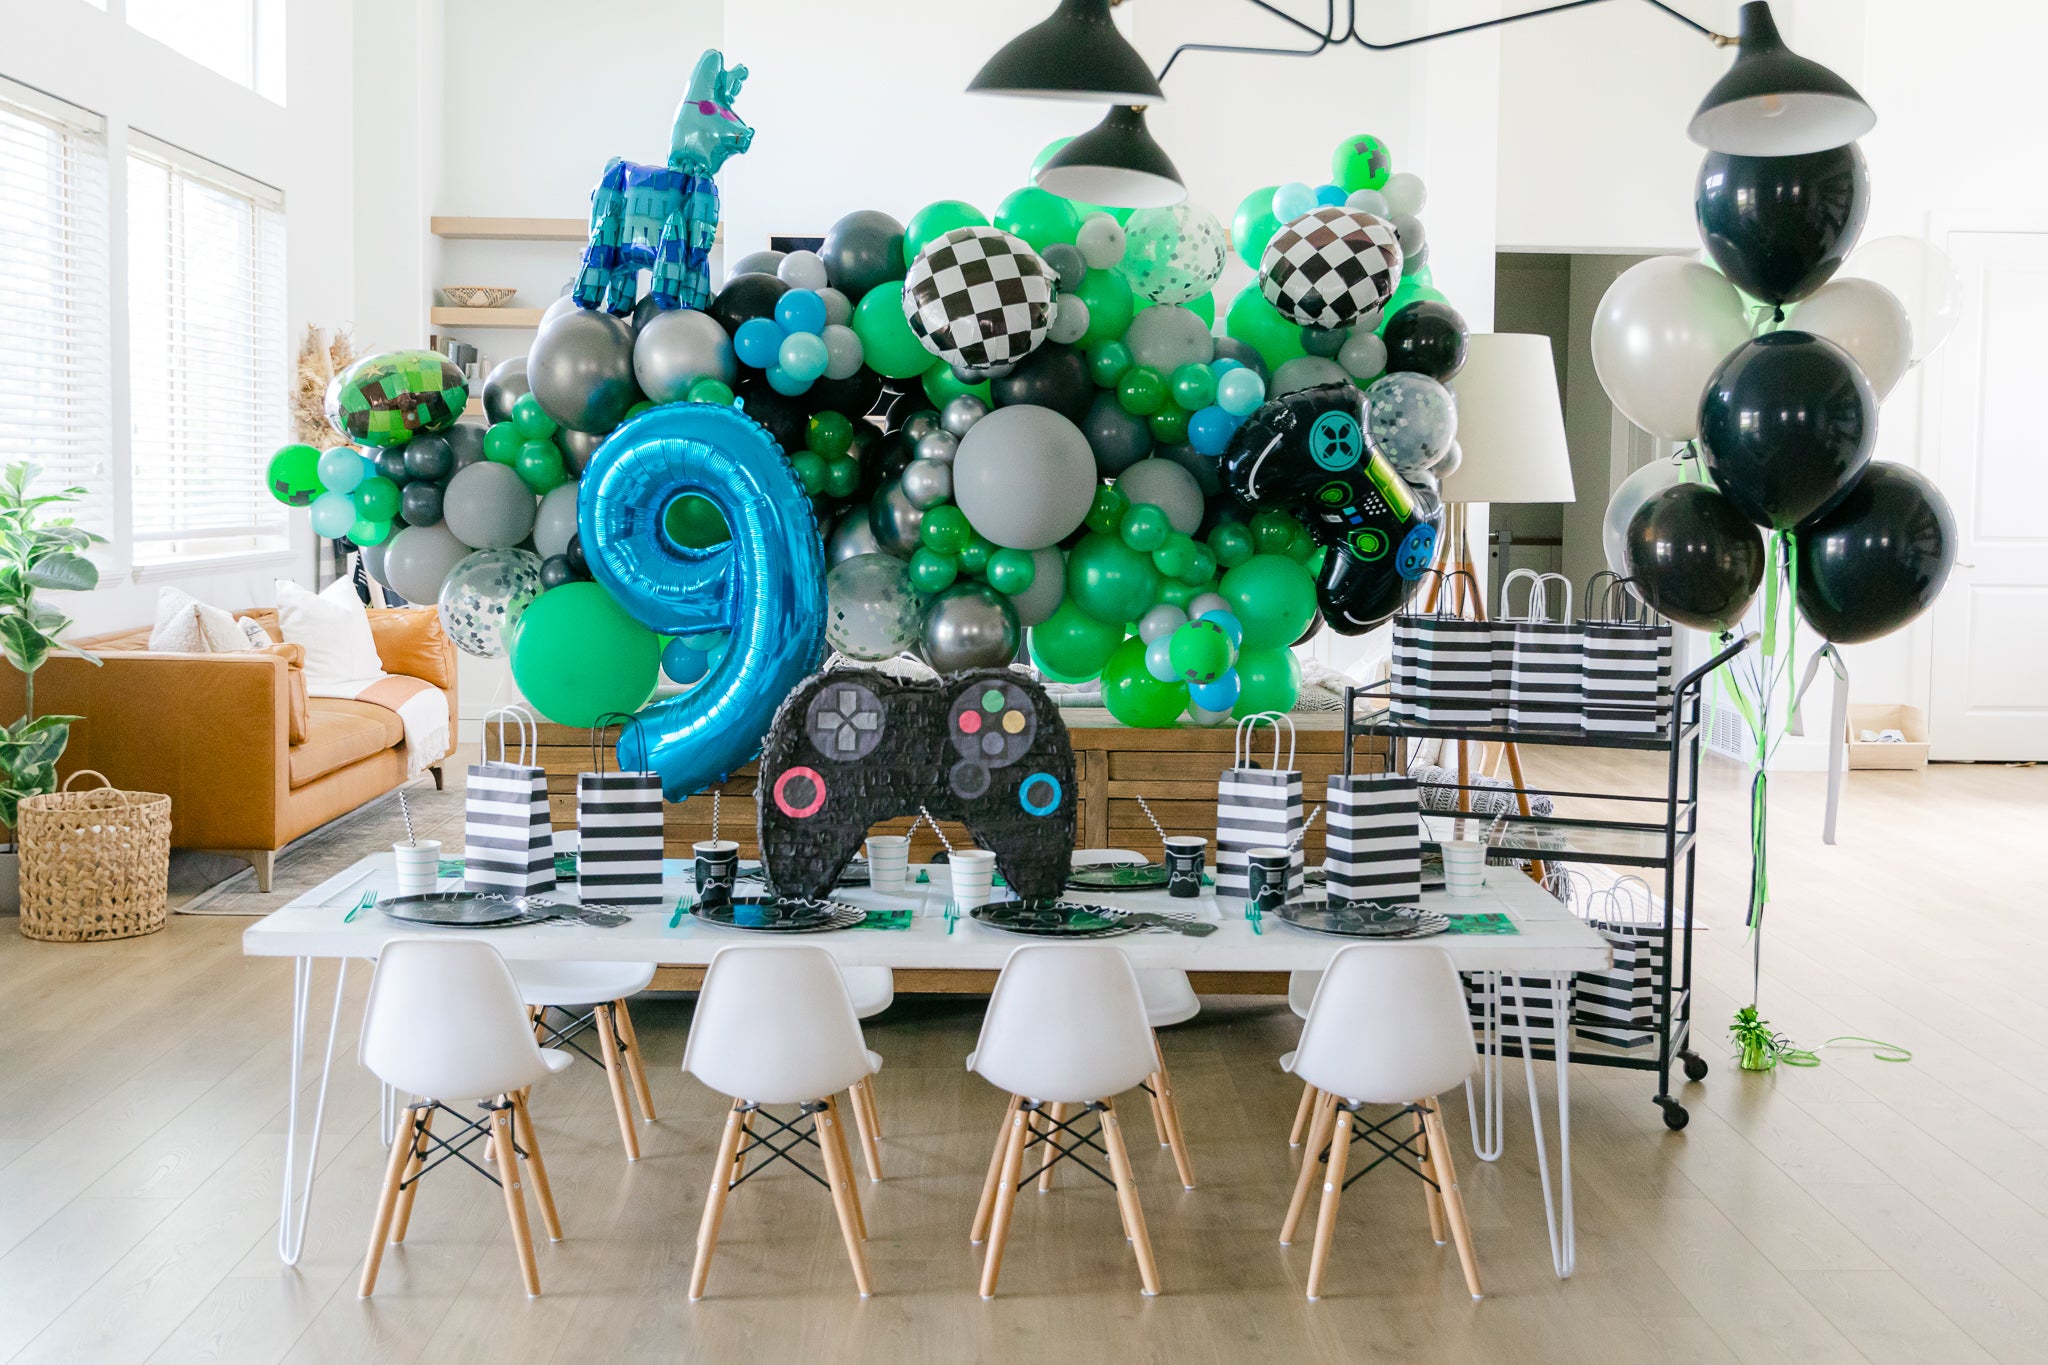 Video Game birthday party decoration ideas.